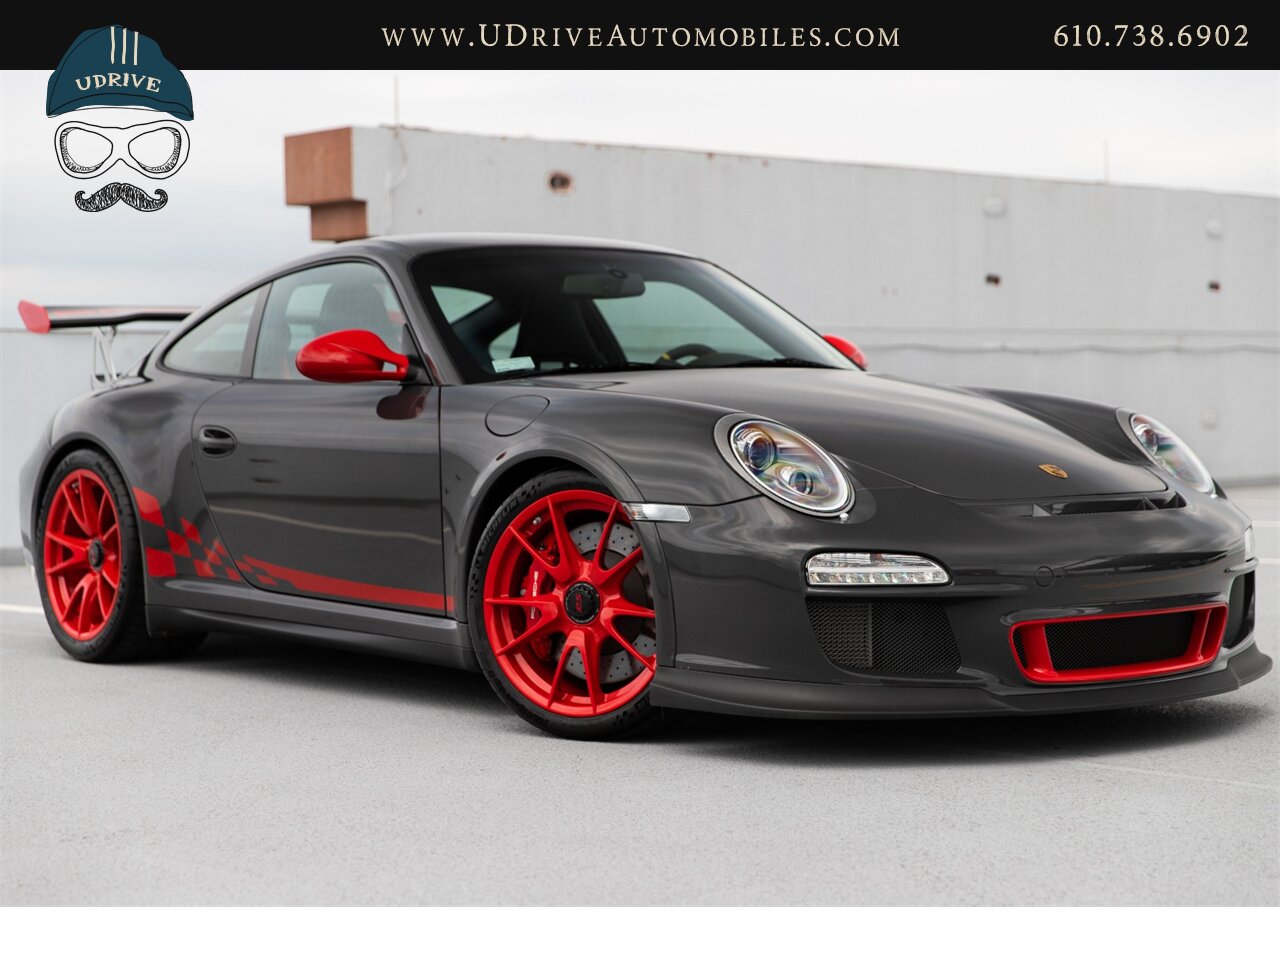 2010 Porsche 911 GT3 RS 1k Miles Dev Red Stitching Throughout  Front Axle Lift Sport Chrono 997.2 - Photo 5 - West Chester, PA 19382